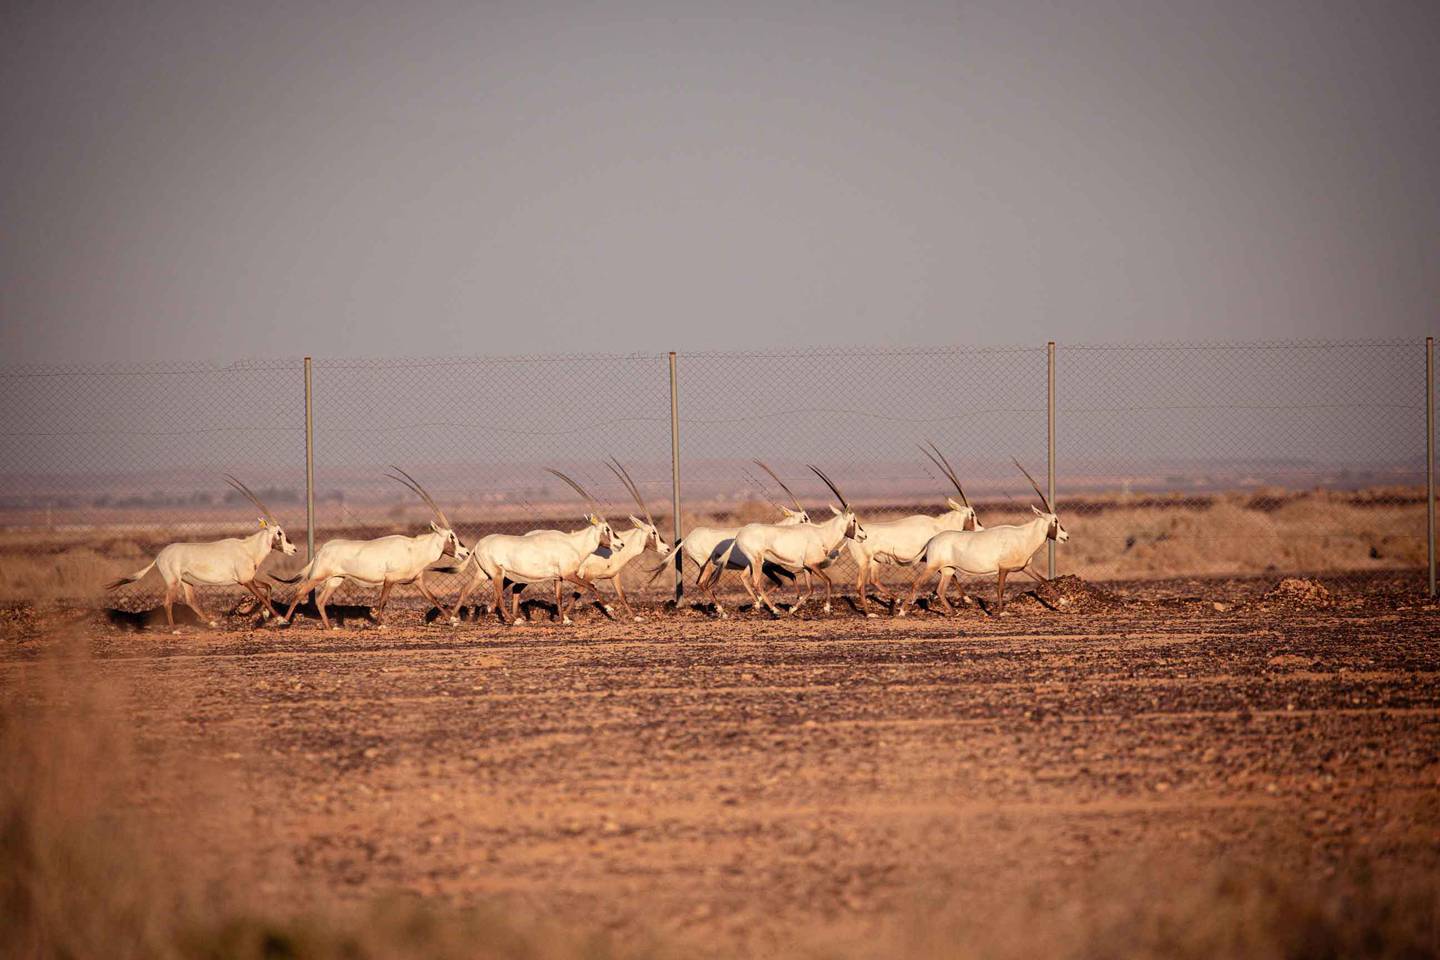 The Arabian oryx, seen here in the Jordanian reserve, has a white coat that reflects heat and helps lower its body temperature.
Photo: EAD